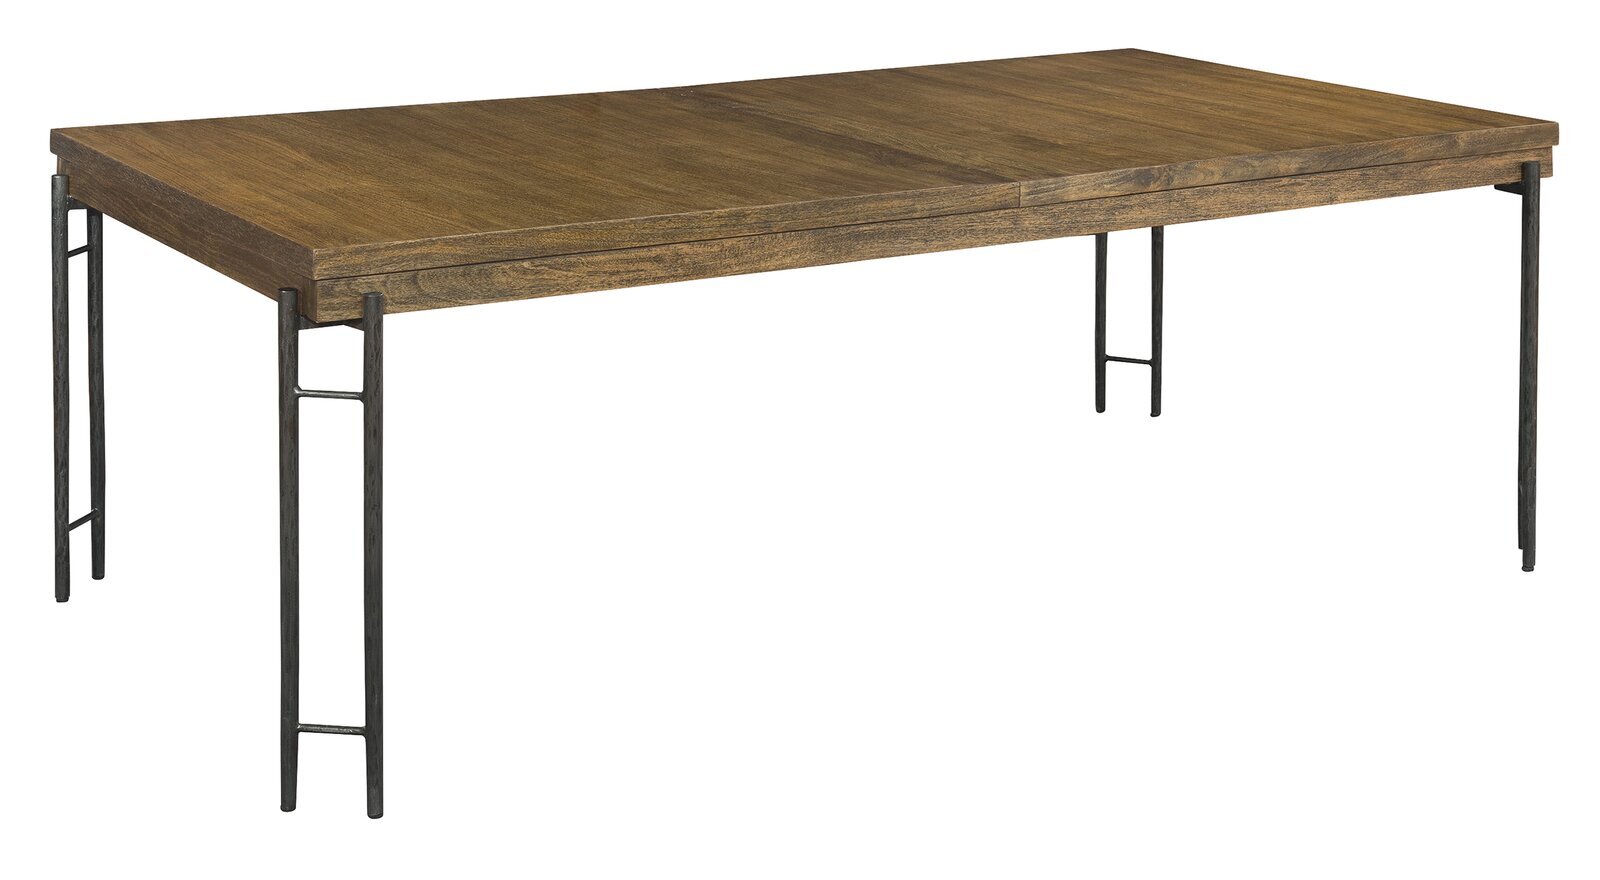 A solid wood hidden leaf table with accent legs